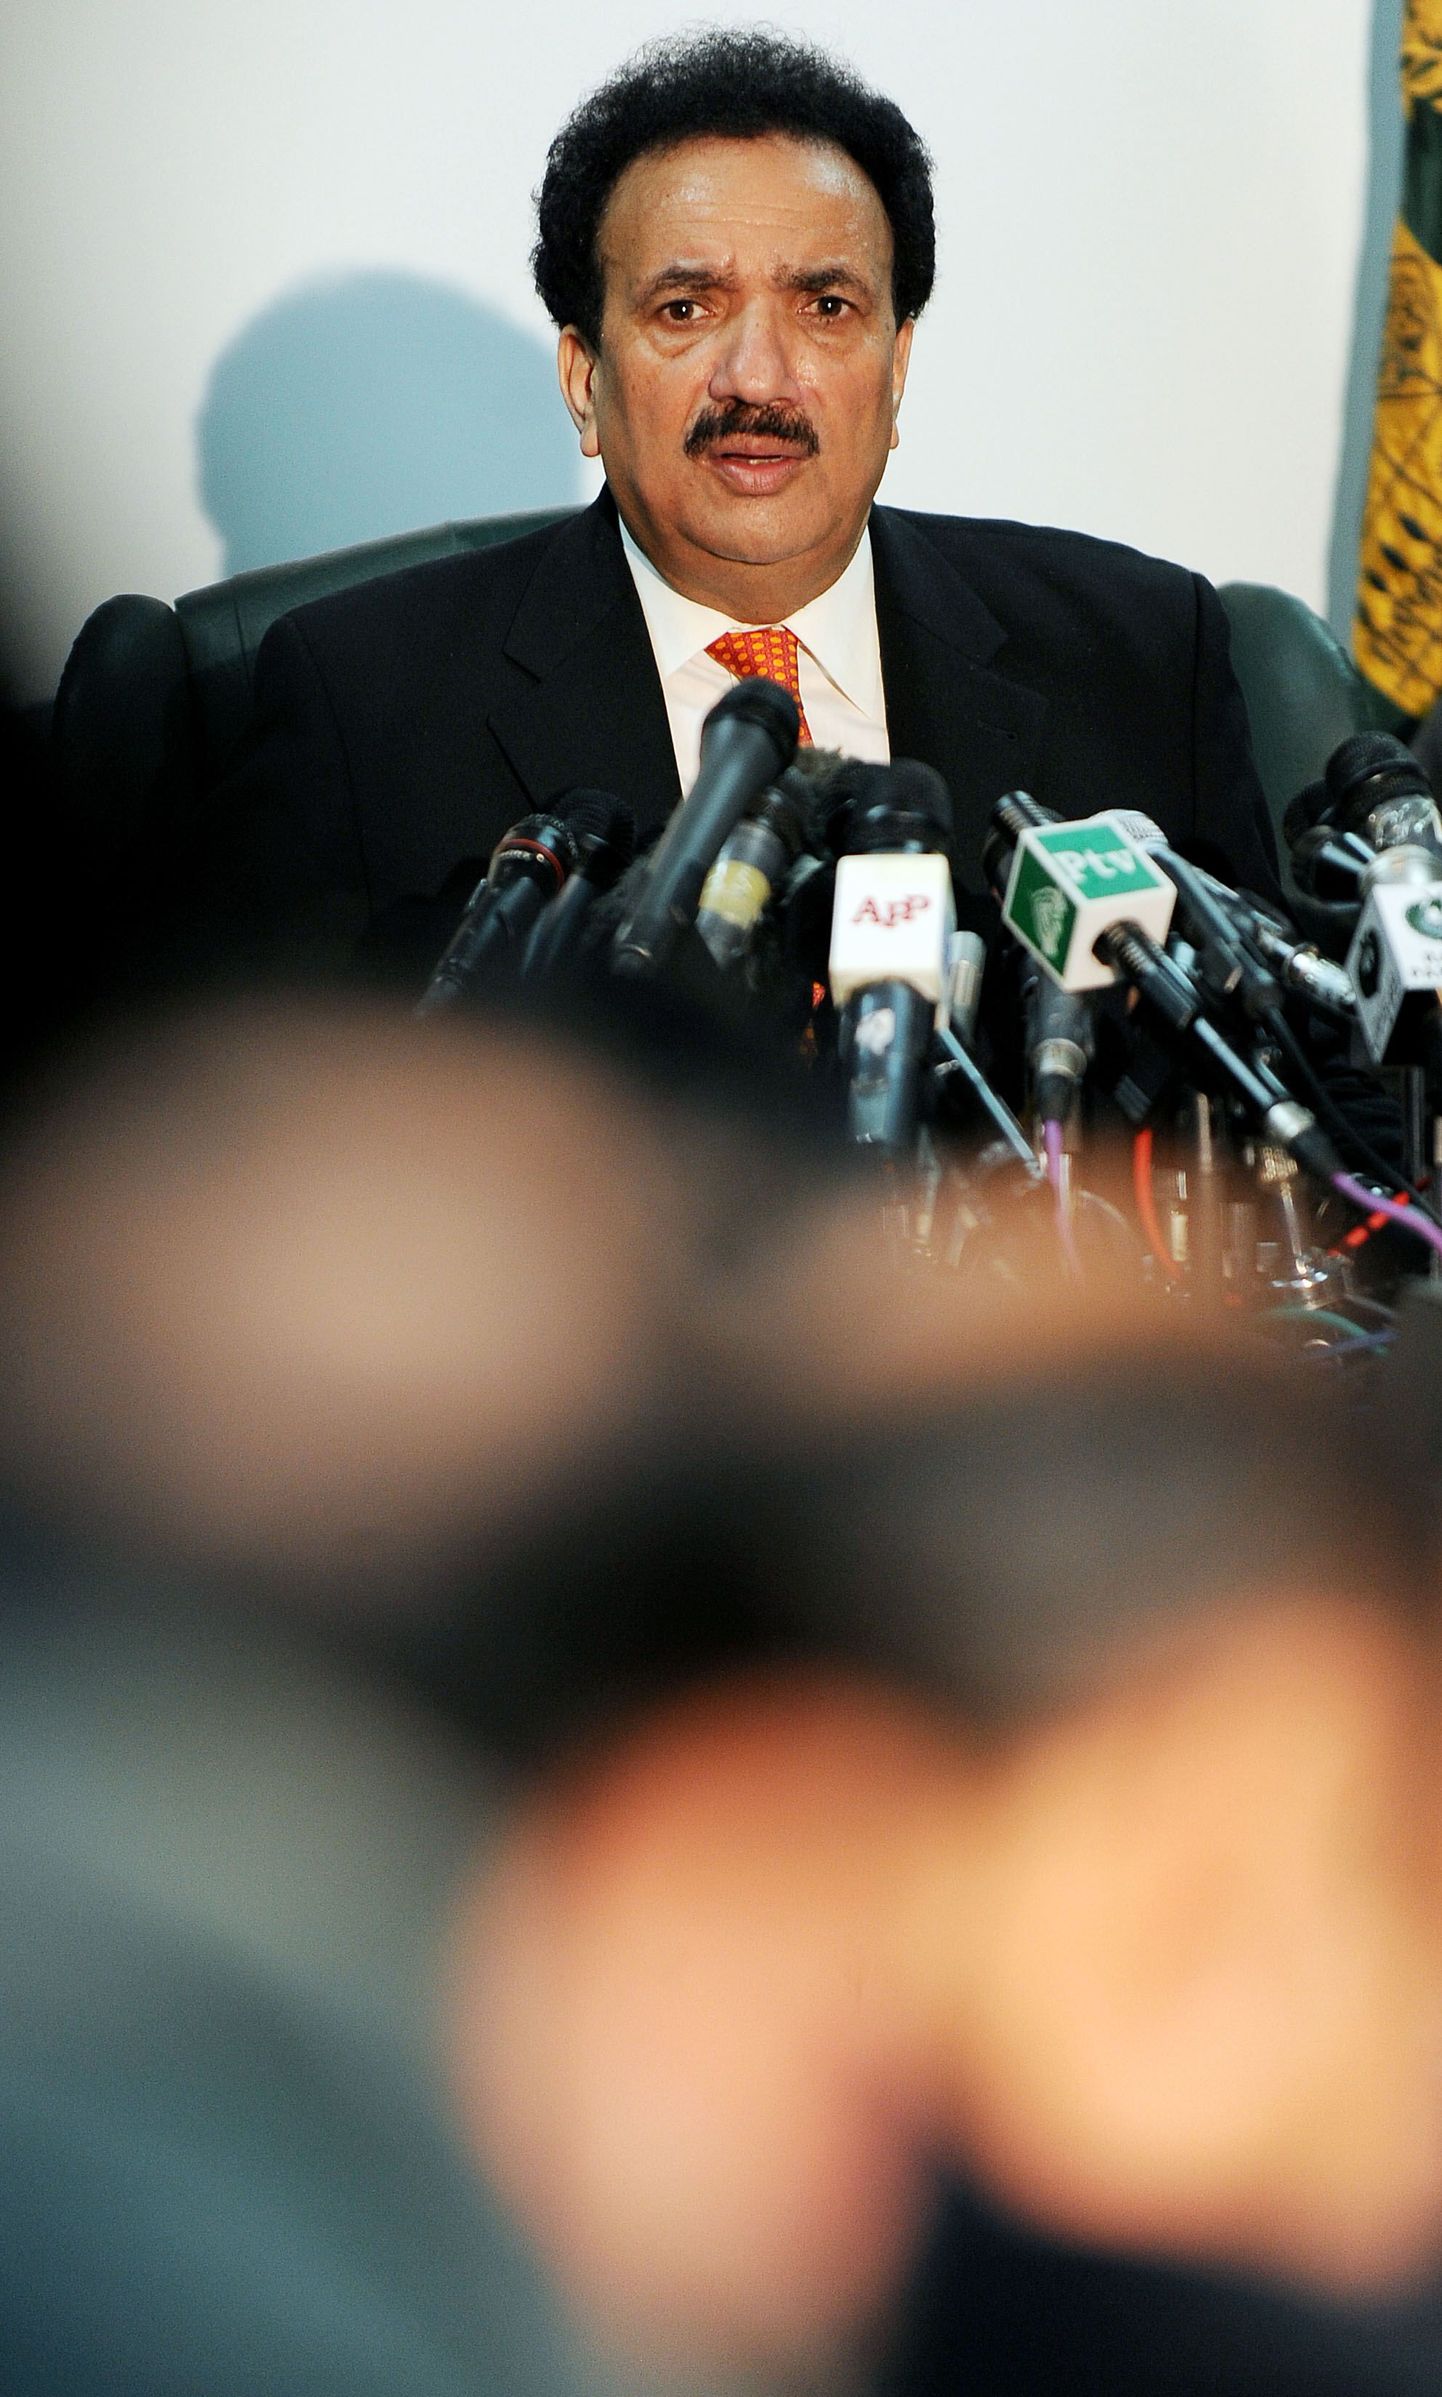 Rehman Malik, Pakistan interior ministry chief speaks during a press conference in Islamabad on February 12, 2009. The Mumbai attacks that killed 165 people last November were partly planned in Pakistan, a top-level Islamabad official admitted on February 12, for the first time. New Delhi has blamed the bloody 60-hour siege on the banned Pakistan-based militant group Lashkar-e-Taiba (LeT), and handed over information last month which Islamabad has been using to investigate the attacks. AFP PHOTO/ Aamir QURESHI